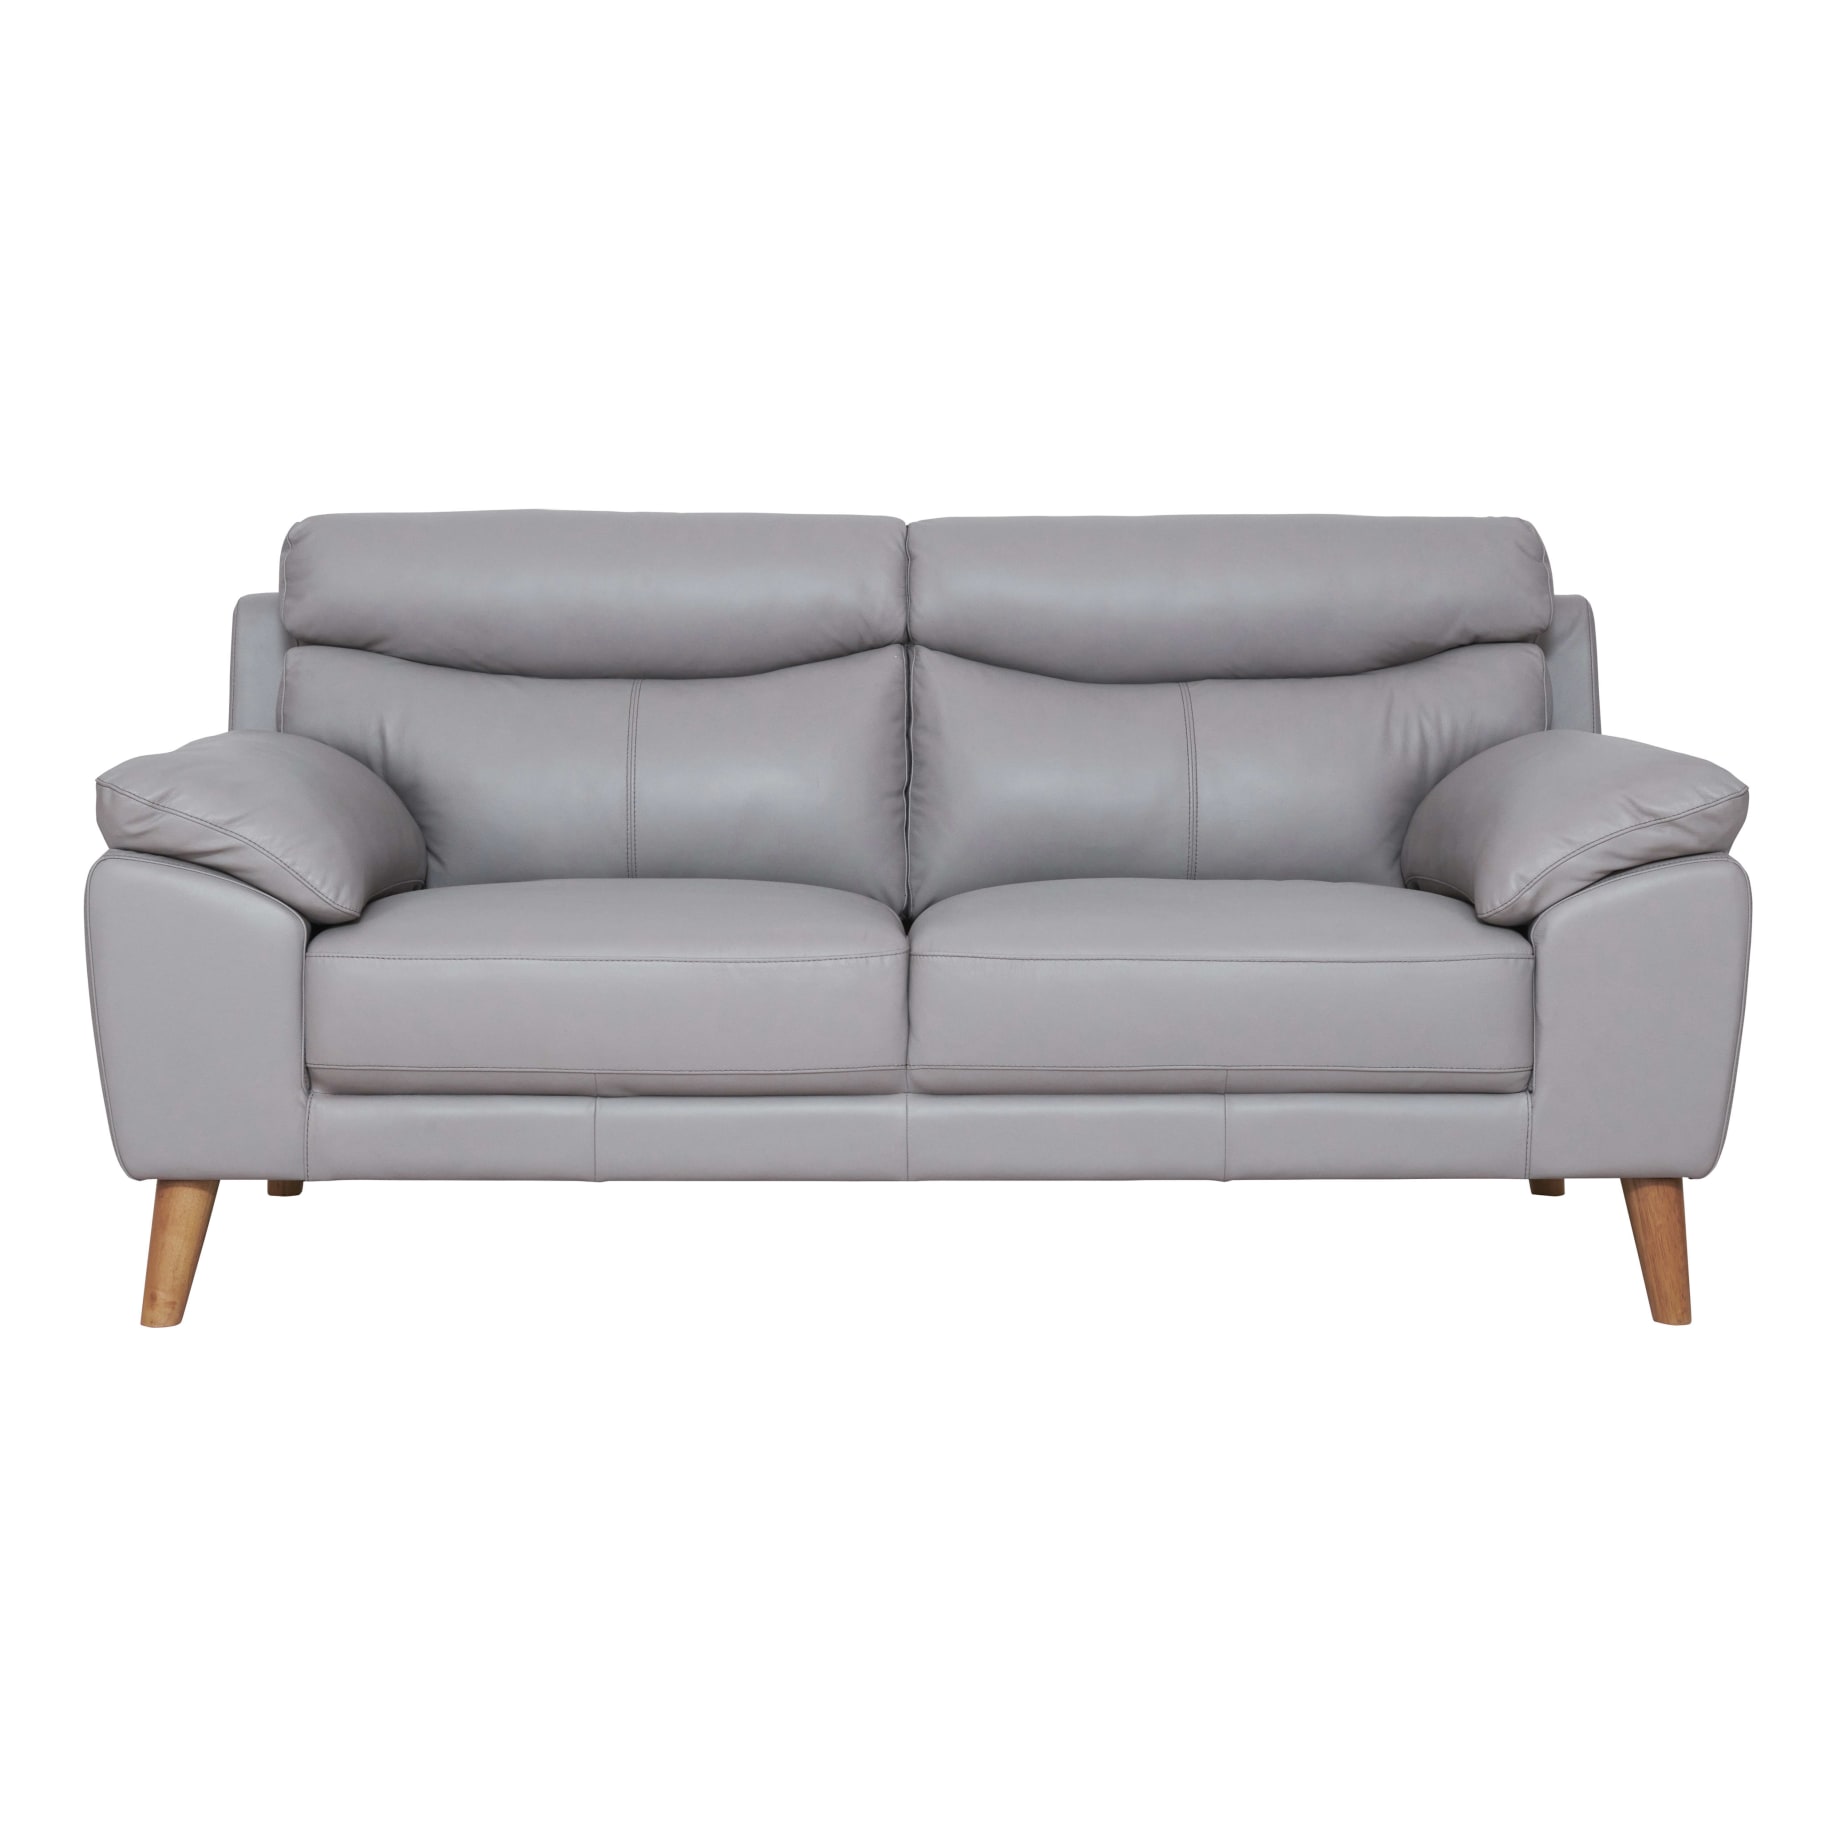 Bronco 2 Seater Sofa in Leather Pewter